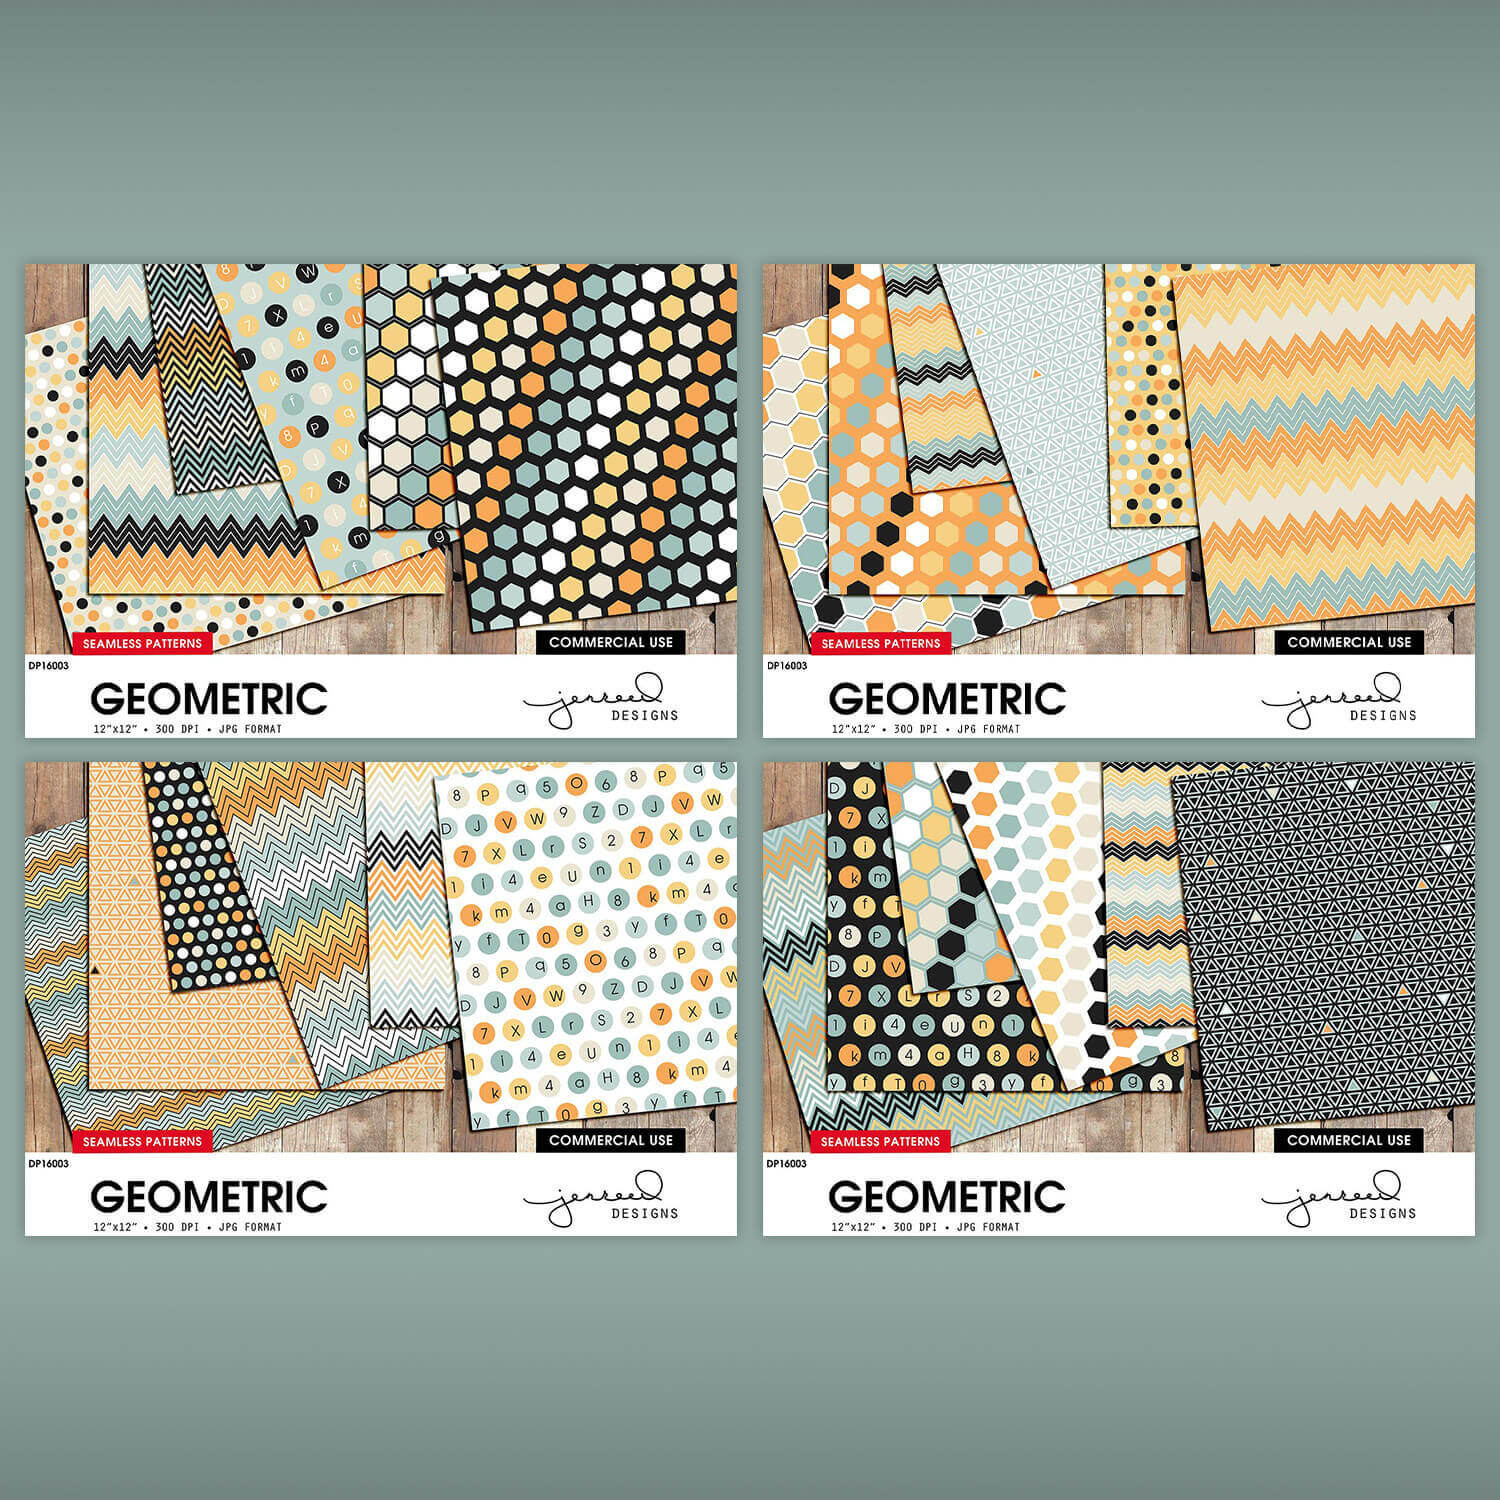 Four Different Types of Geometric Patterns.